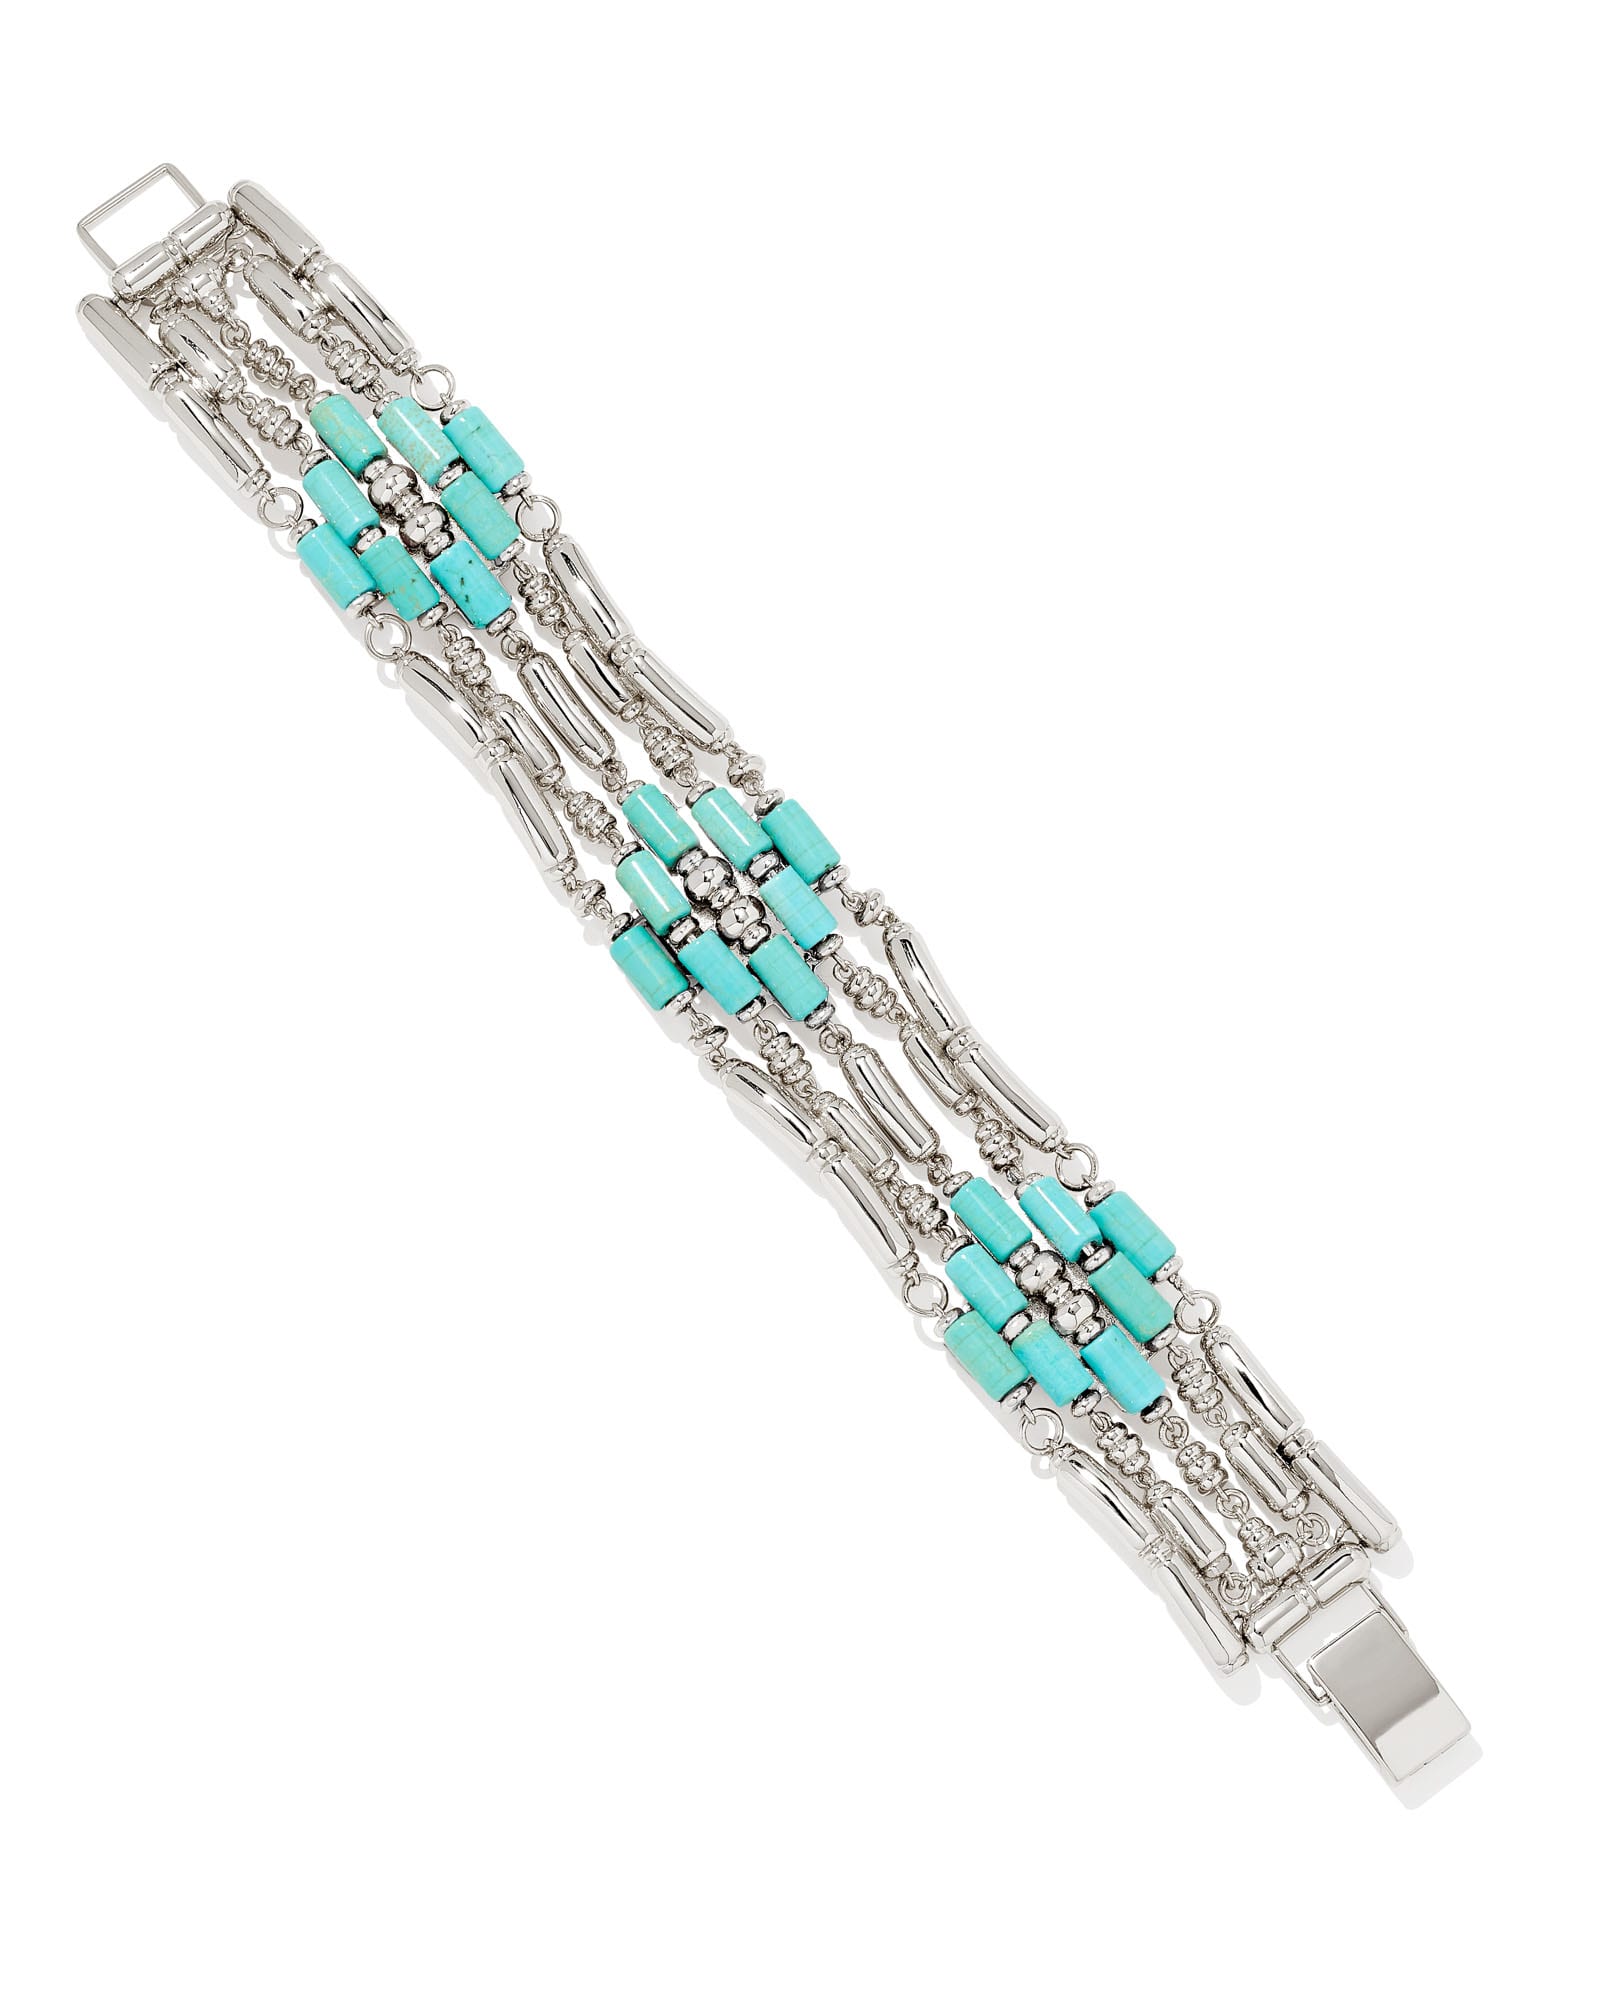 Ember Silver Statement Cuff Bracelet in Variegated Turquoise Magnesite